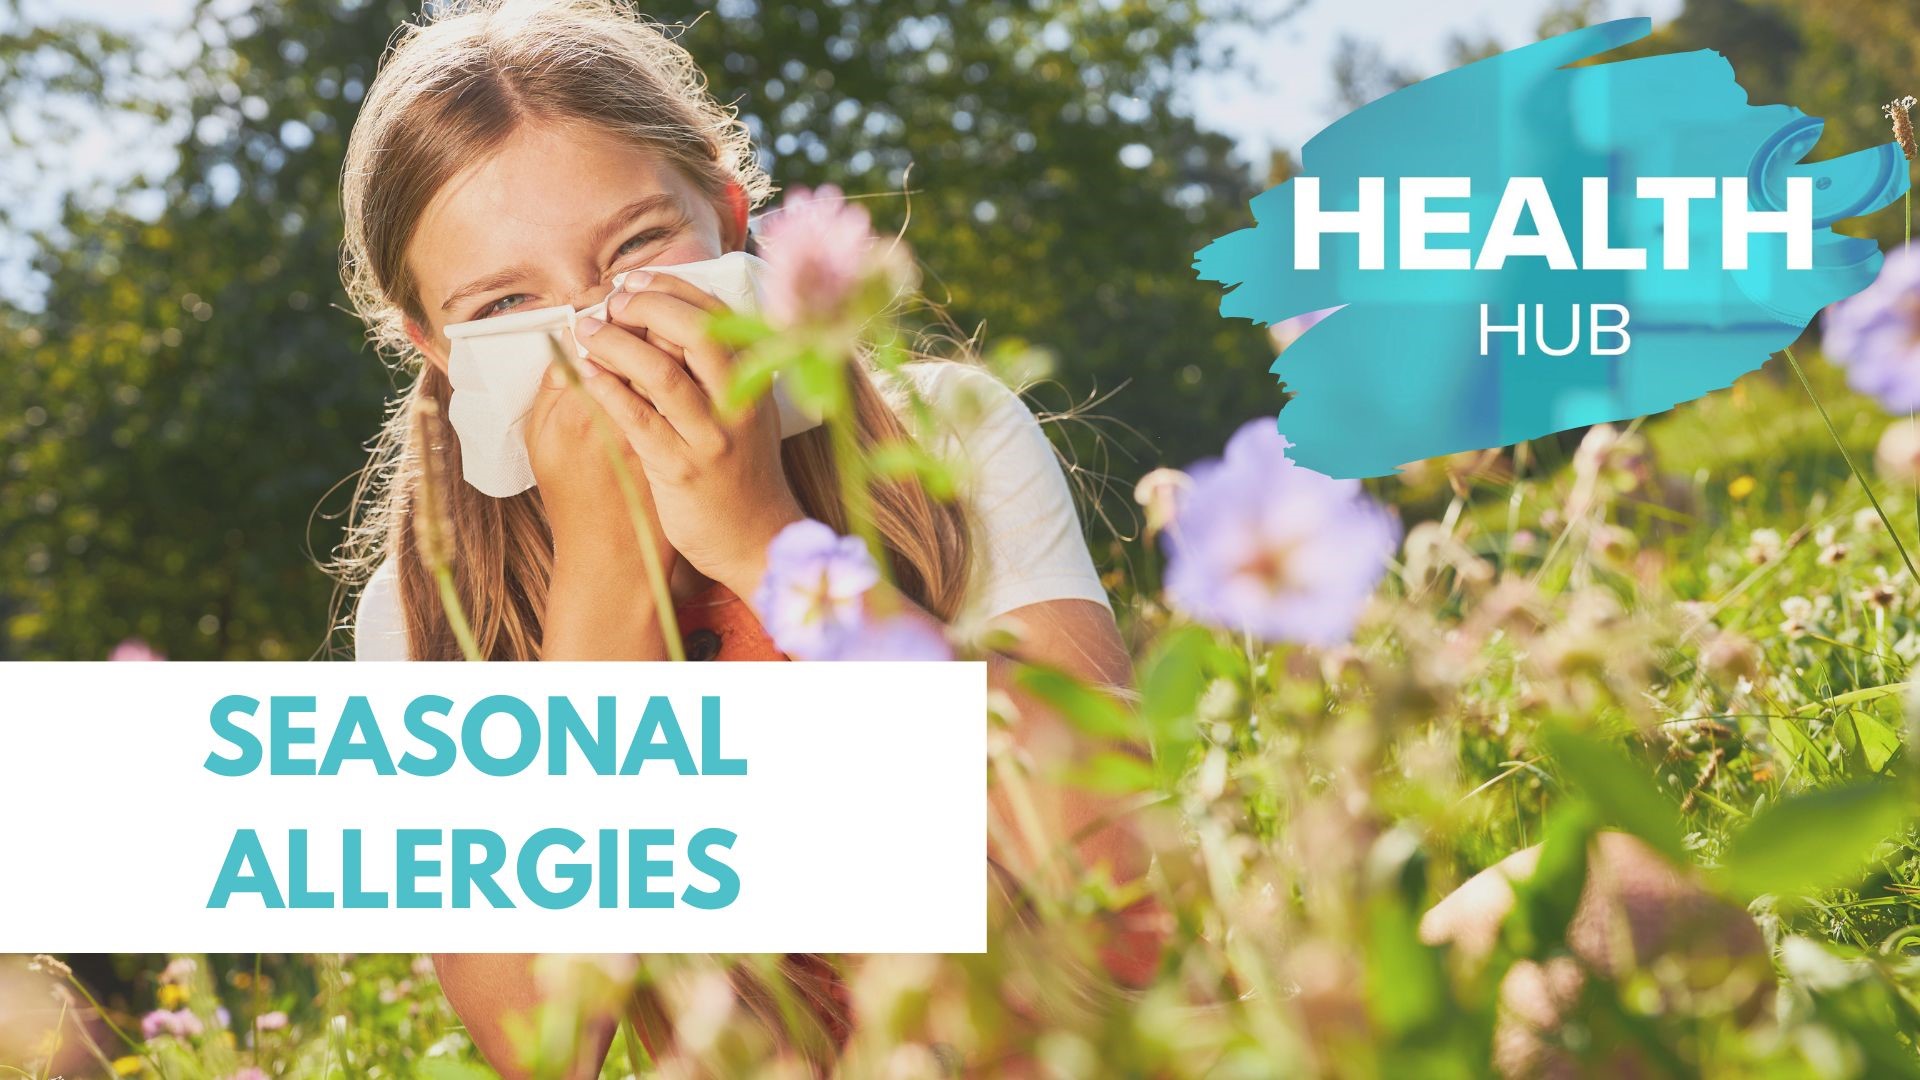 A deeper dive into seasonal allergies, from the causes to treatments. We debunk an old wives' tale on home remedies and share how even your pets can be impacted.